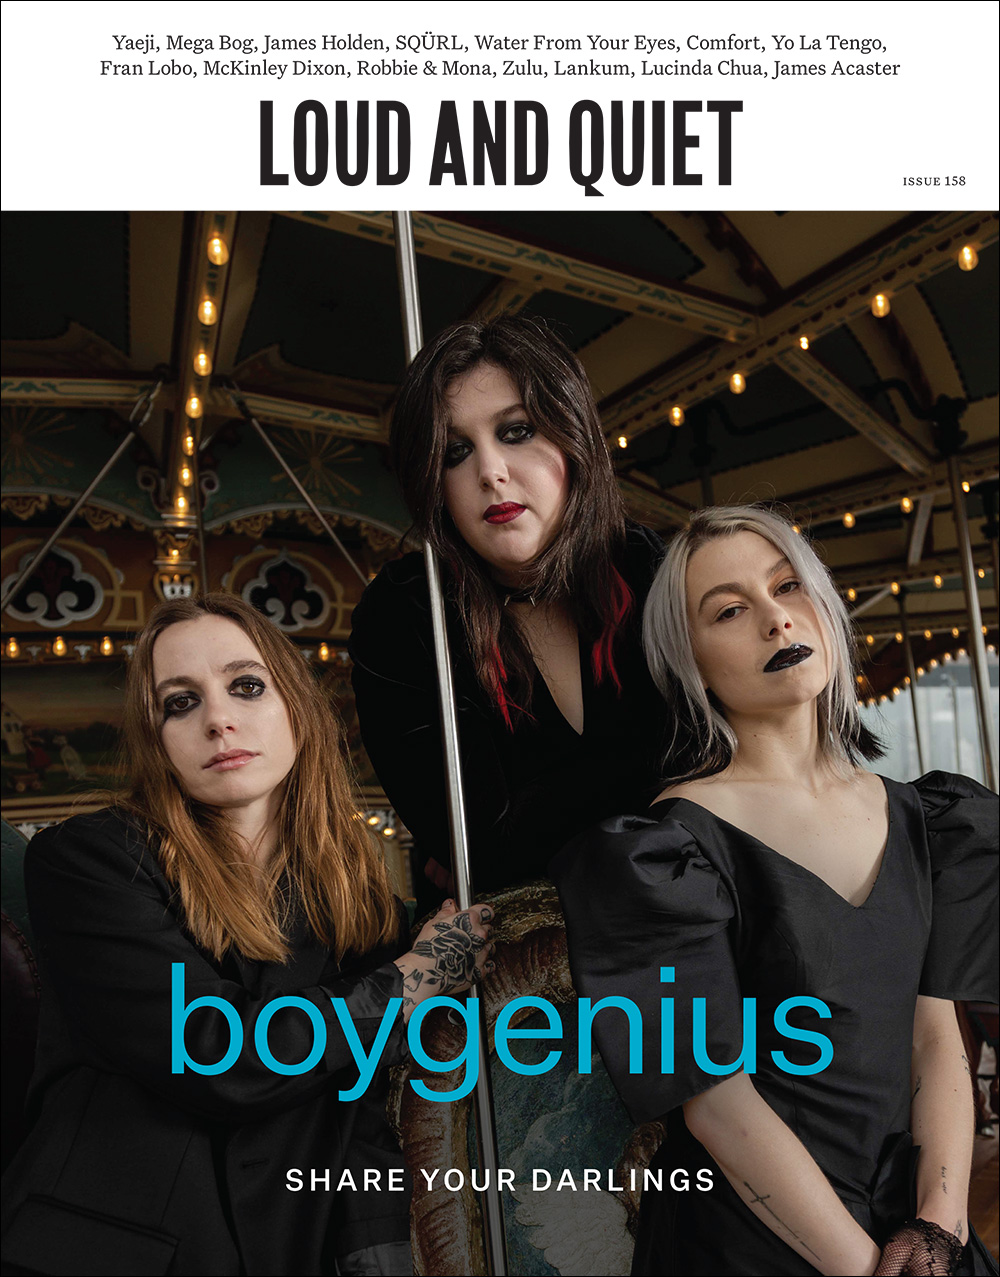 Boygenius on the cover of Loud And Quiet